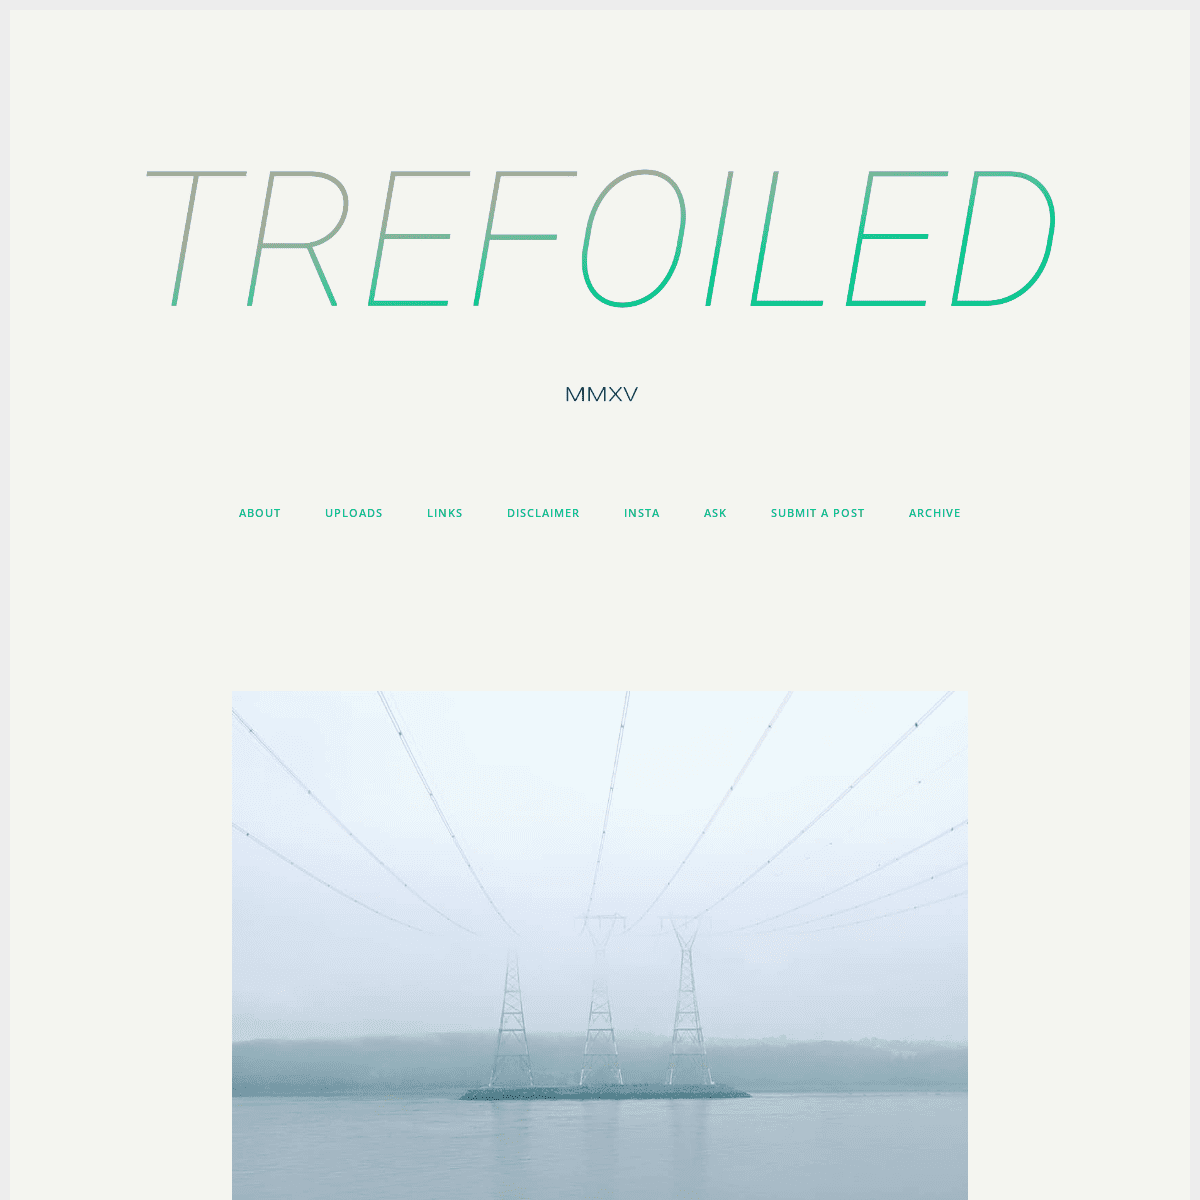 A complete backup of trefoiled.tumblr.com